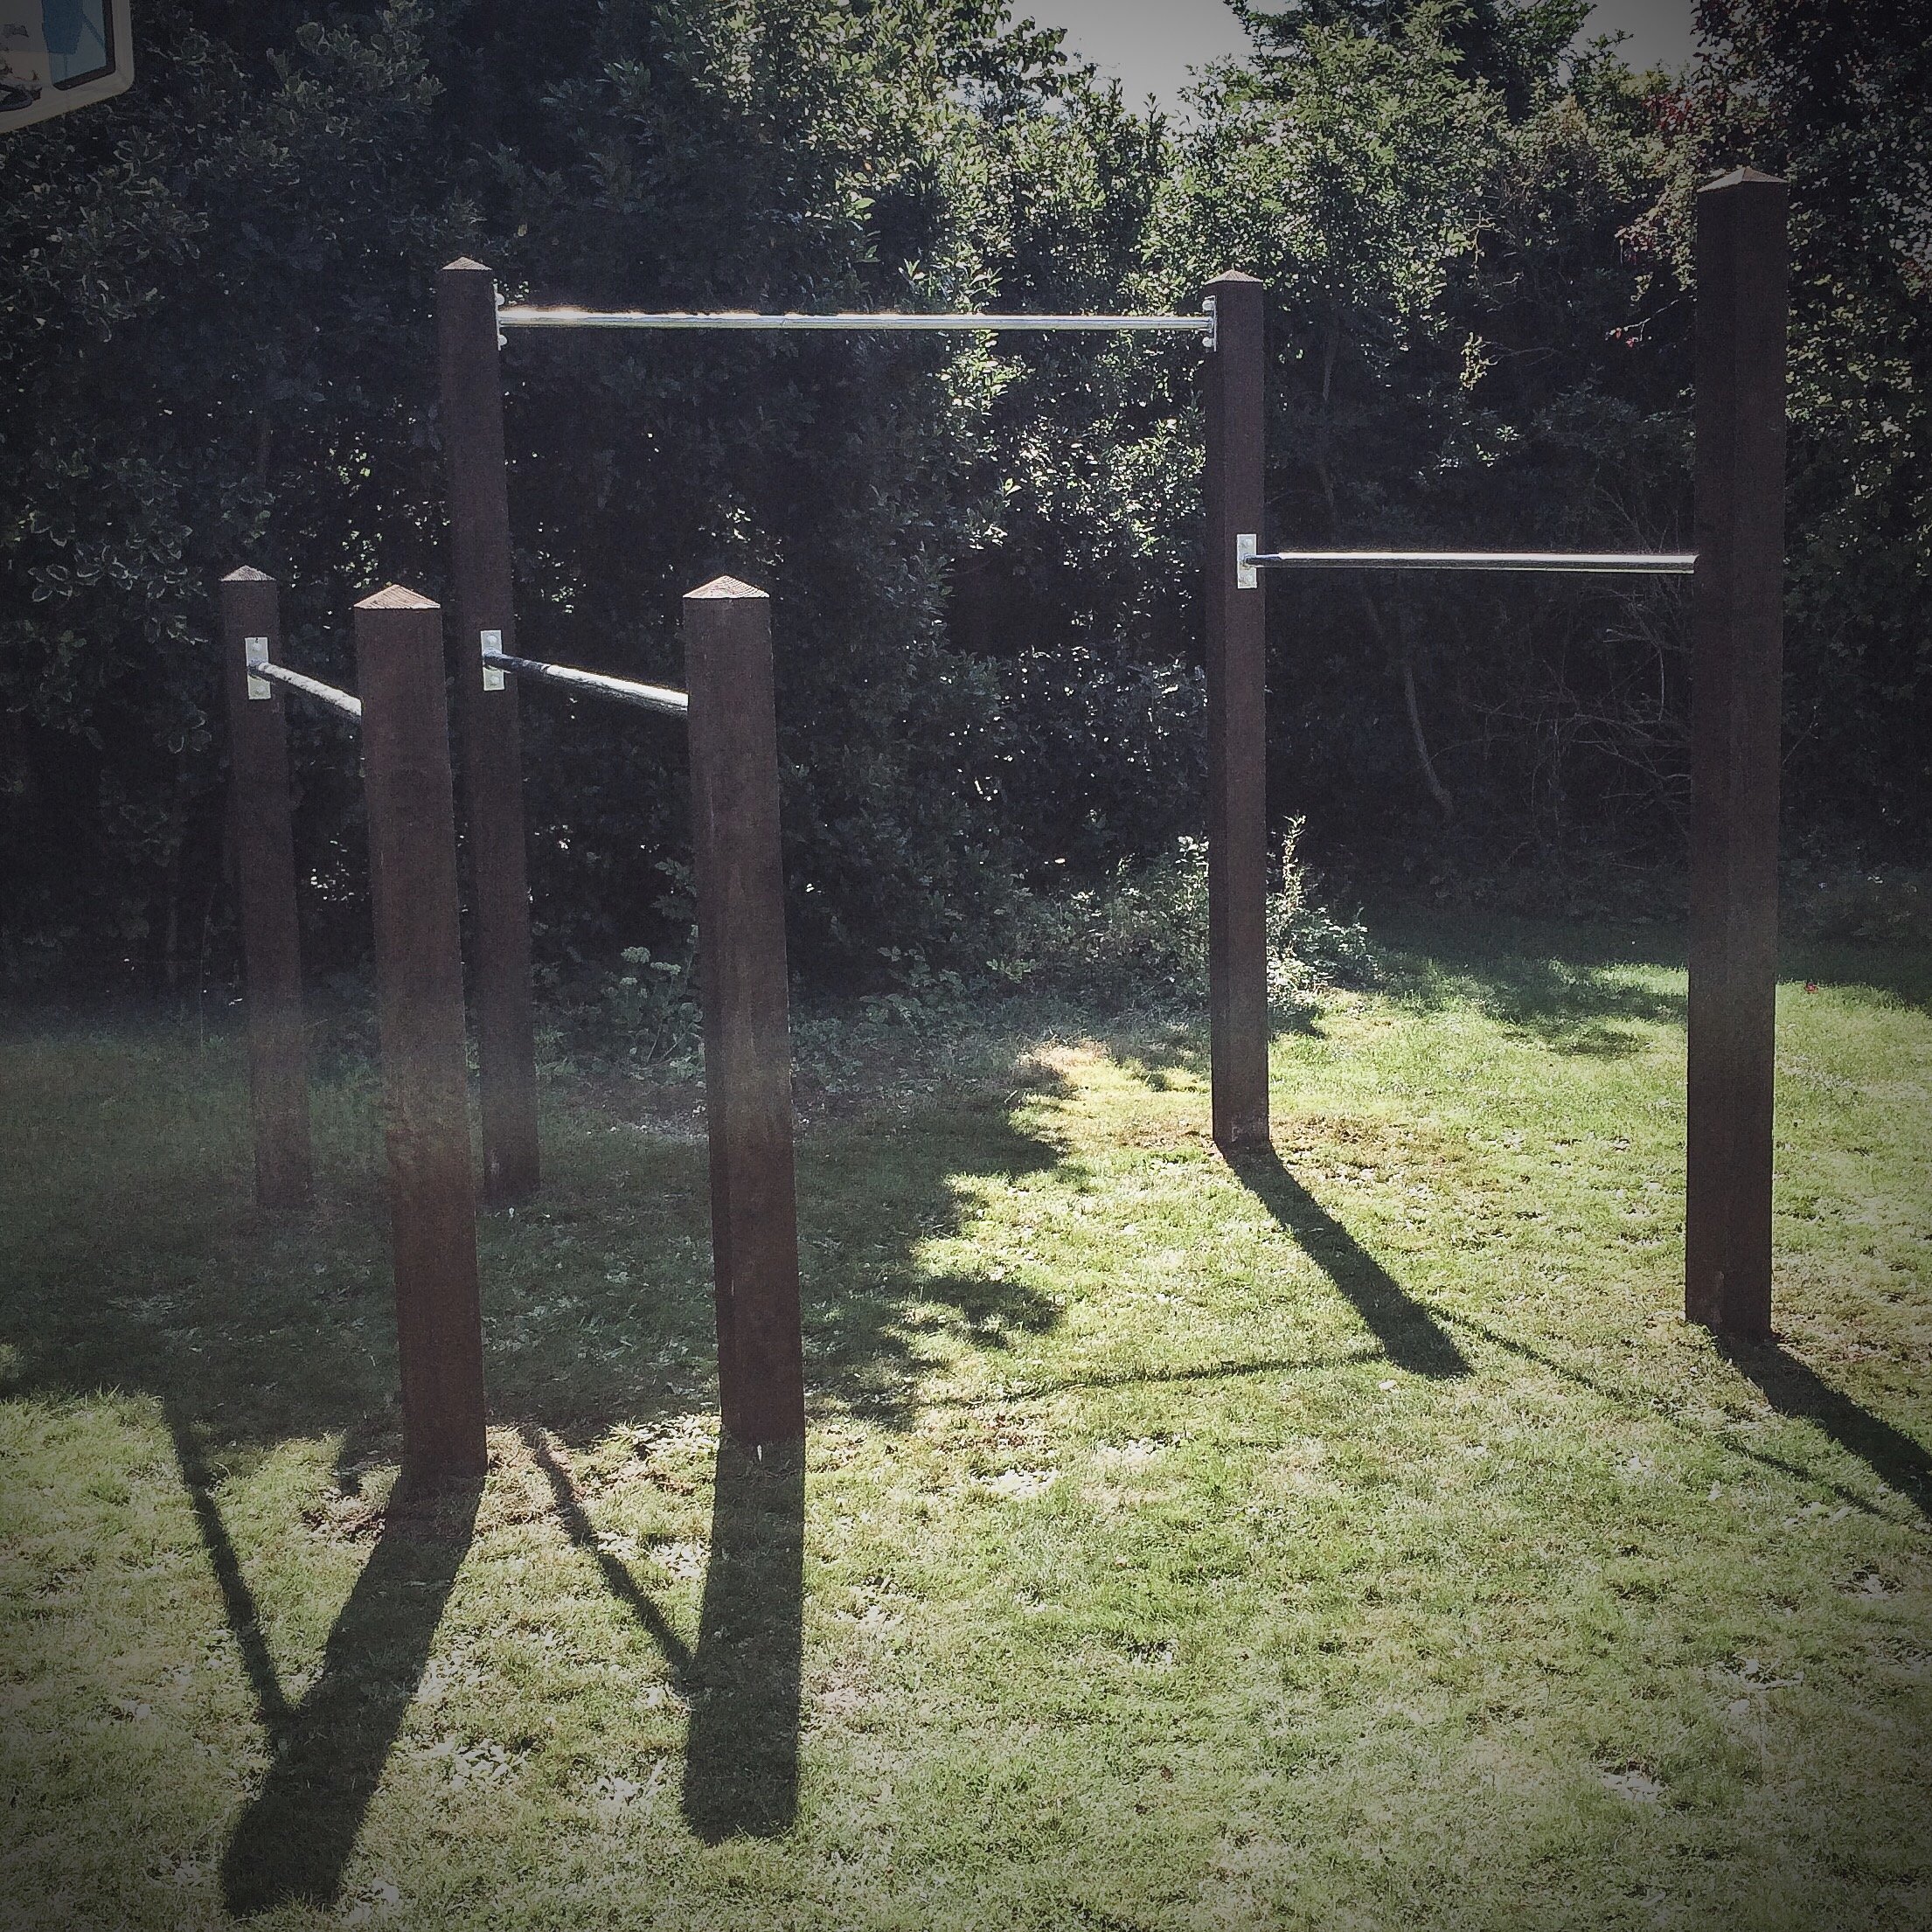 003 2015 garden double pull up bar and dip bars installation.JPG